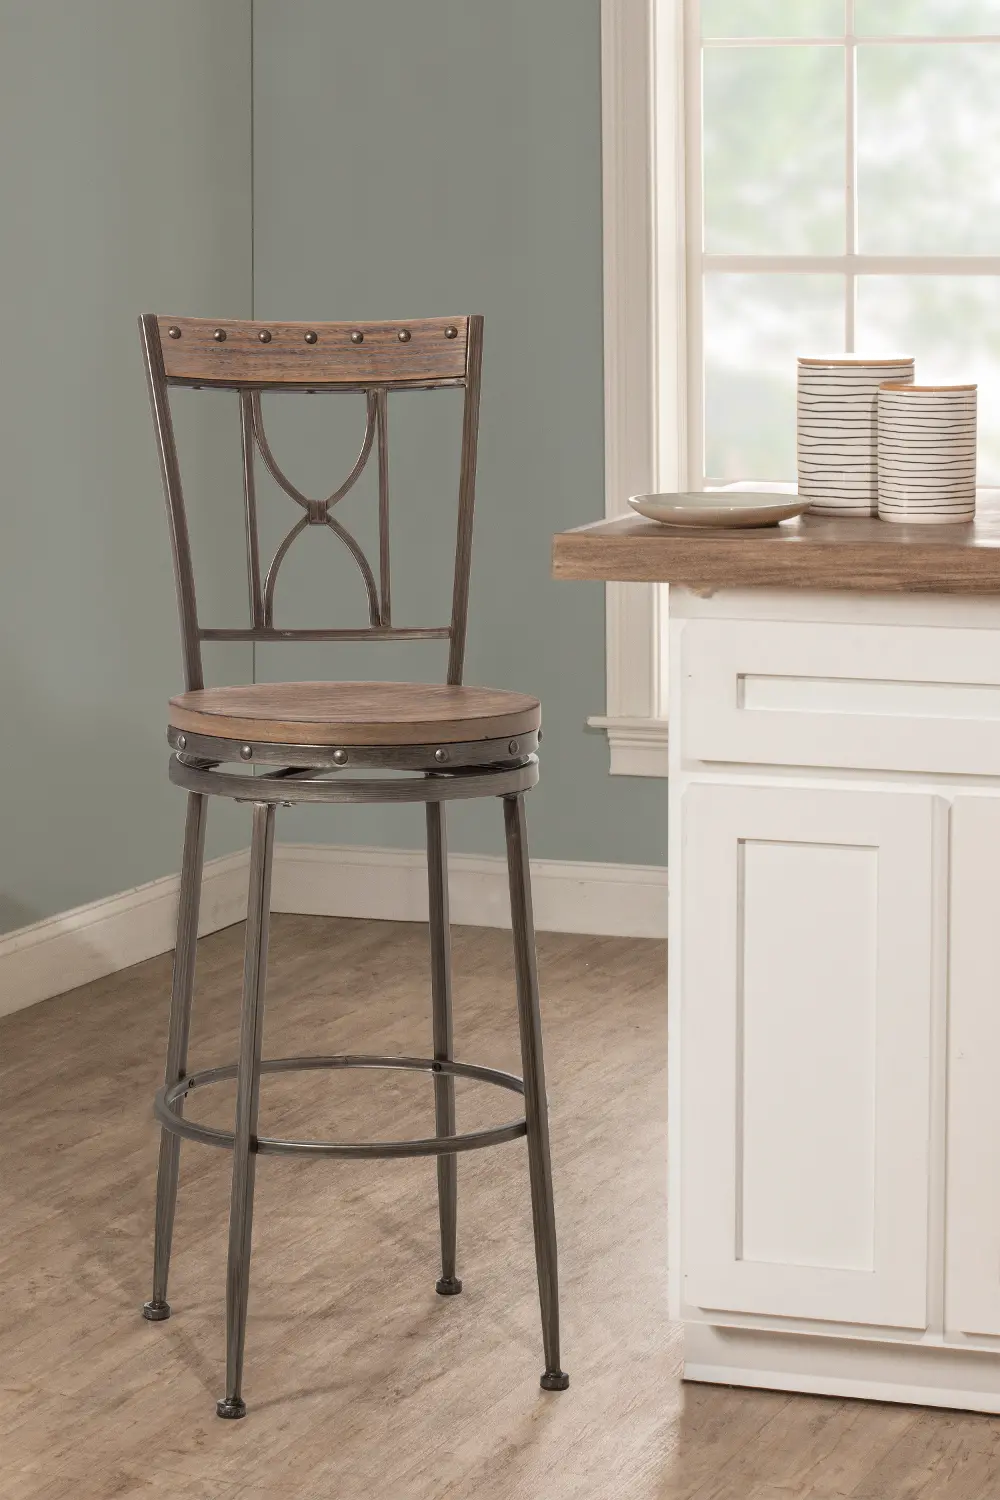 Distressed Gray and Brown Swivel Counter Height Stool - Paddock-1